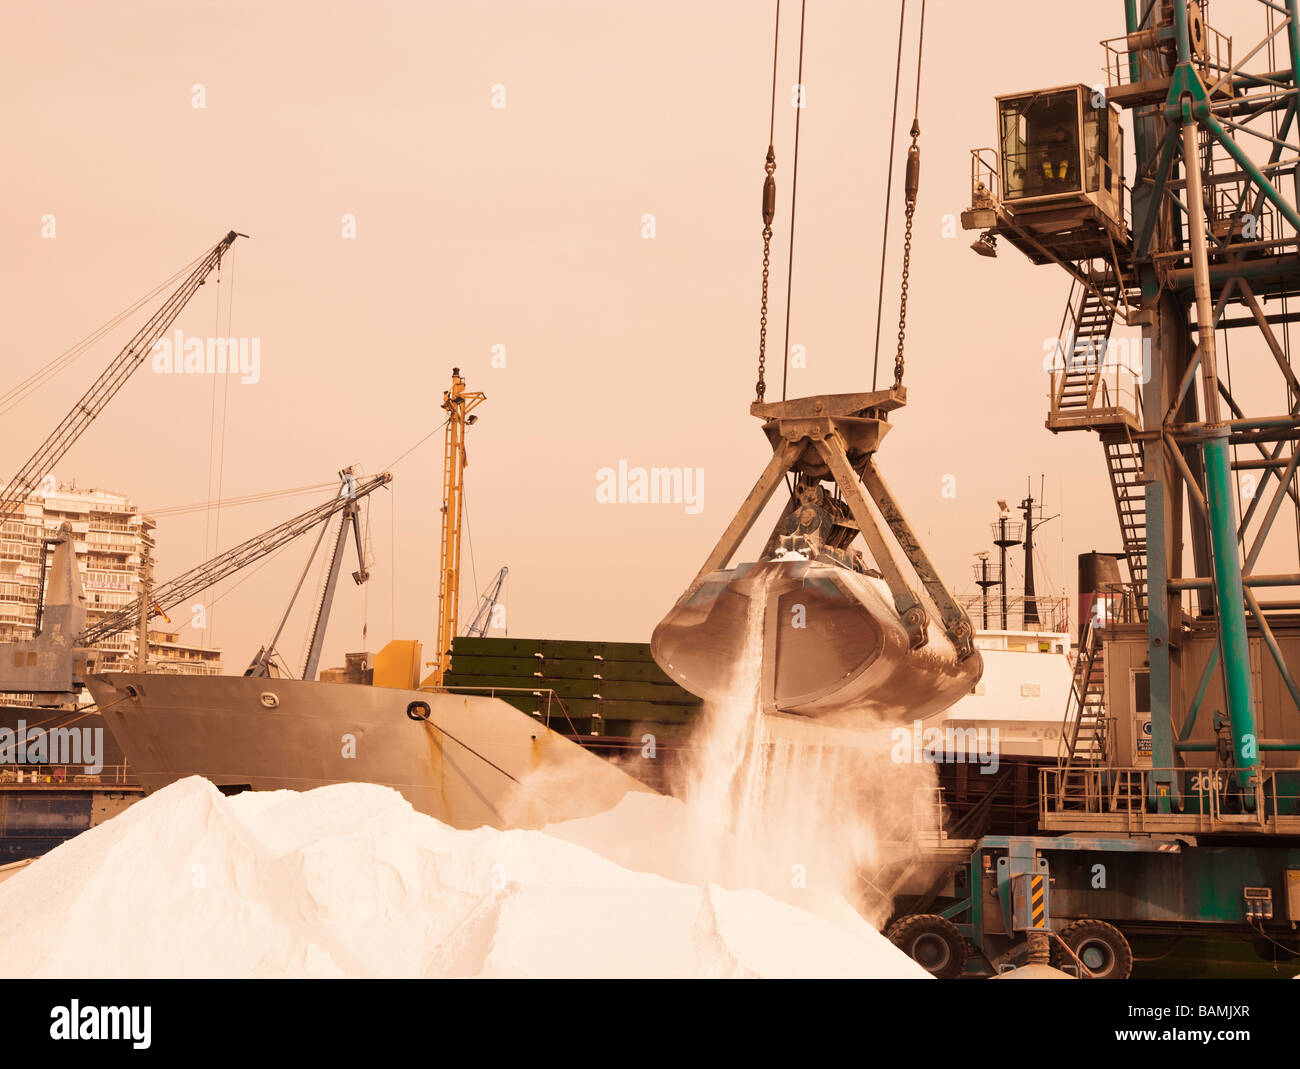 Harbour crane lifting phosphates into ship in Malaga port, Spain; Crane lifting phosphates into ship Stock Photo